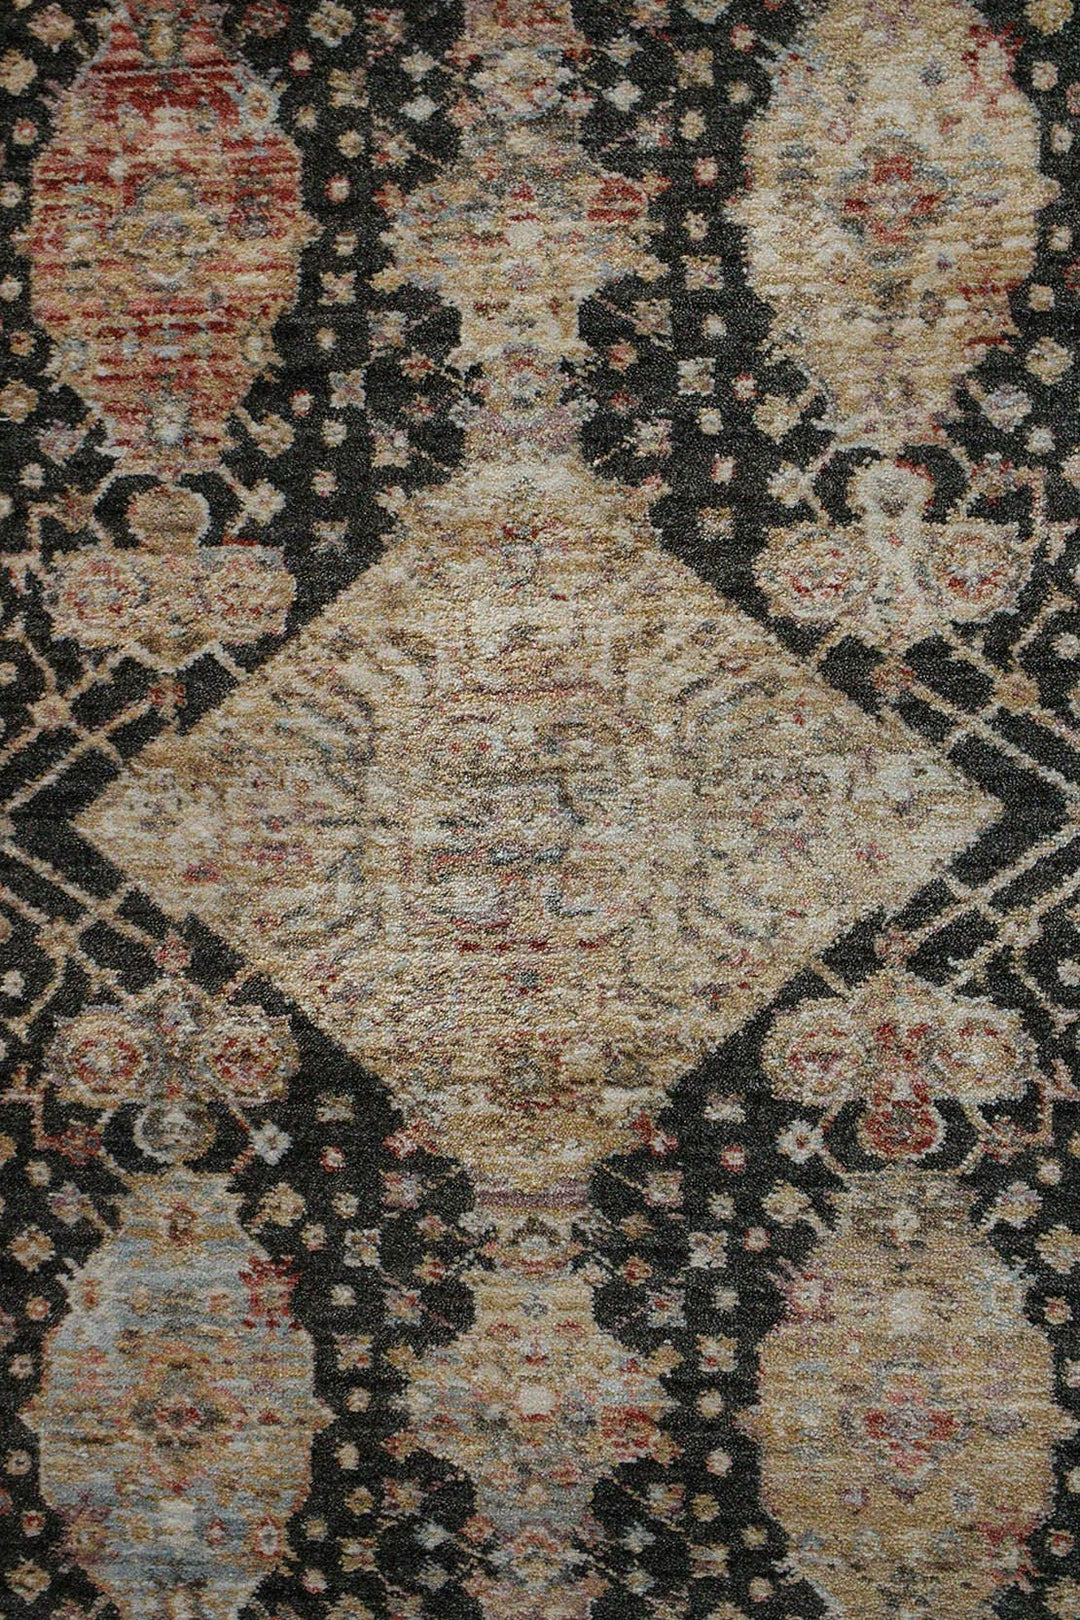 Premium Quality Turkish Antia Rug - 3.9 x 5.9 FT - Brown - Resilient Construction for Long-Lasting Use - V Surfaces